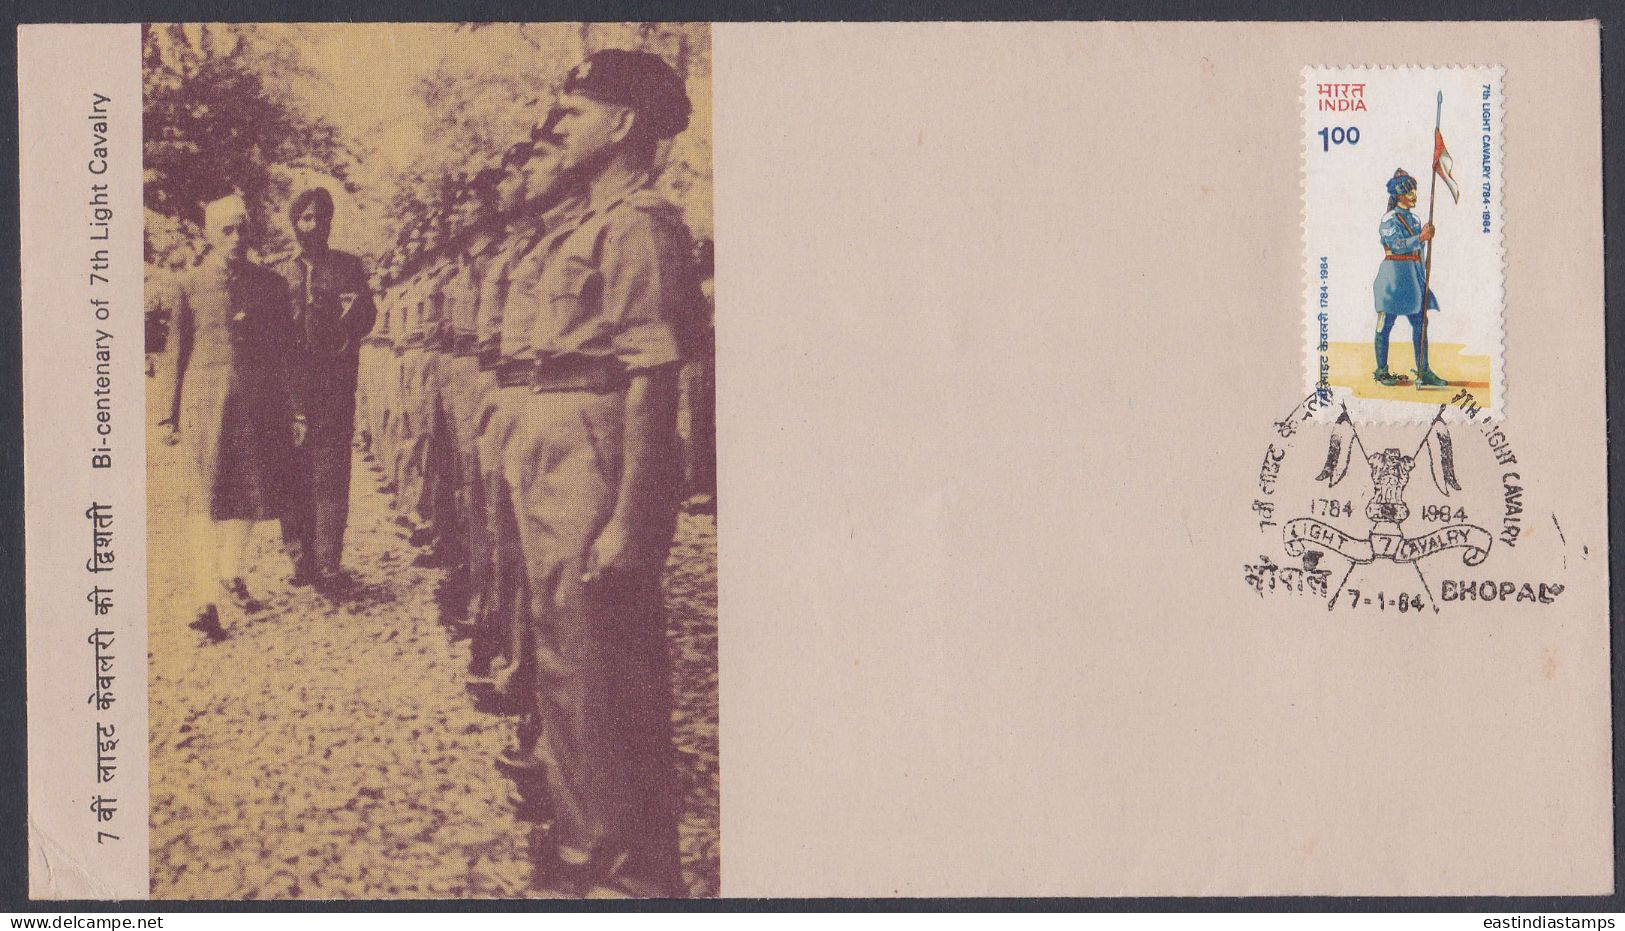 Inde India 1984 FDC 7th Light Cavalry, Military, Army, Soldier, Flag, Nehru, First Day Cover - Covers & Documents